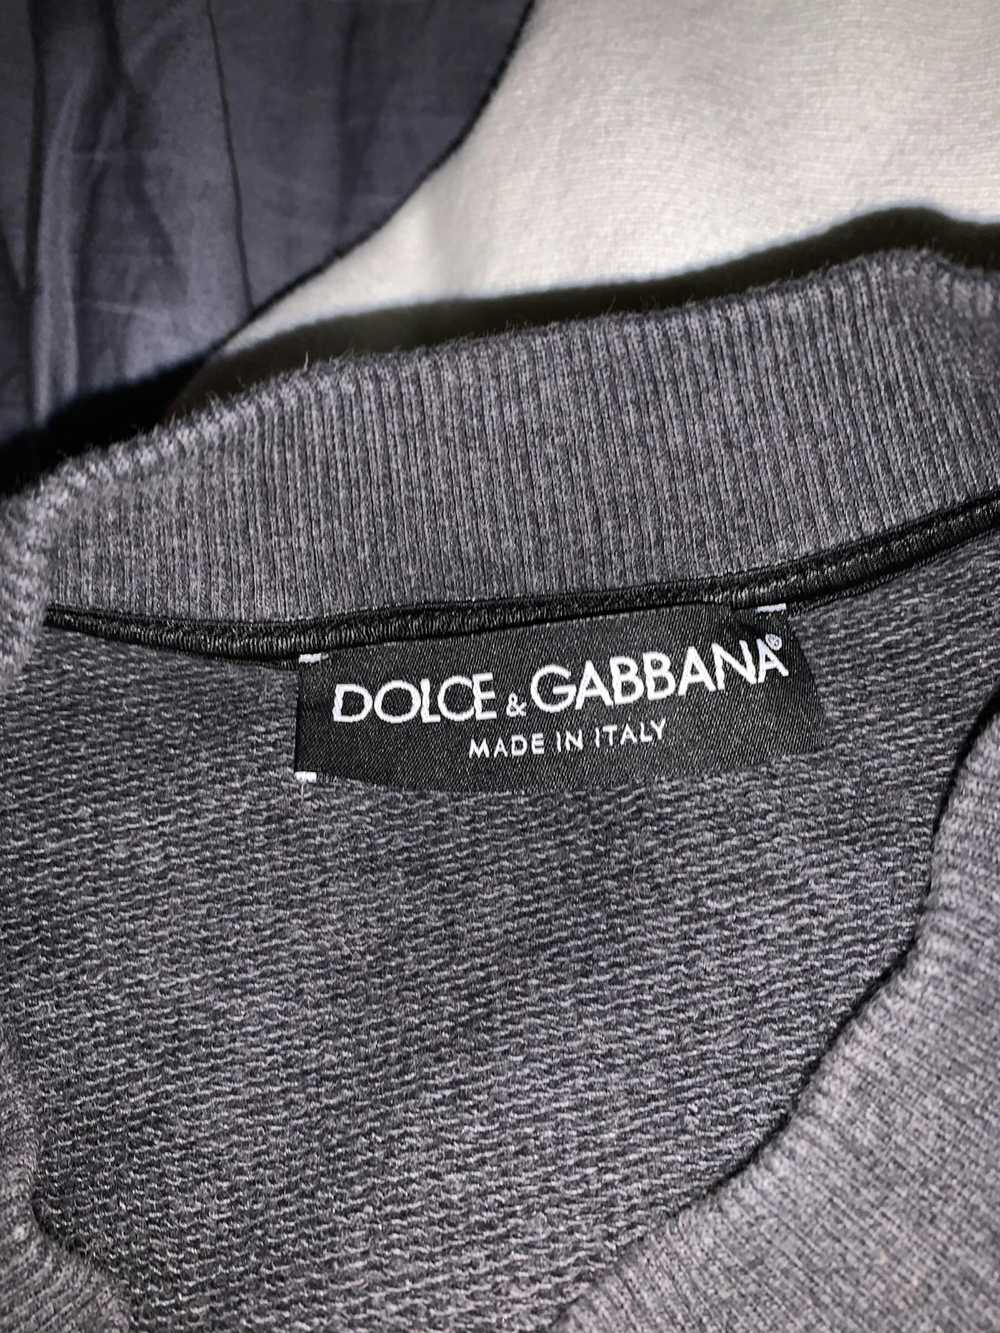 Dolce & Gabbana D&G “King I Was There” Crew Neck - image 2